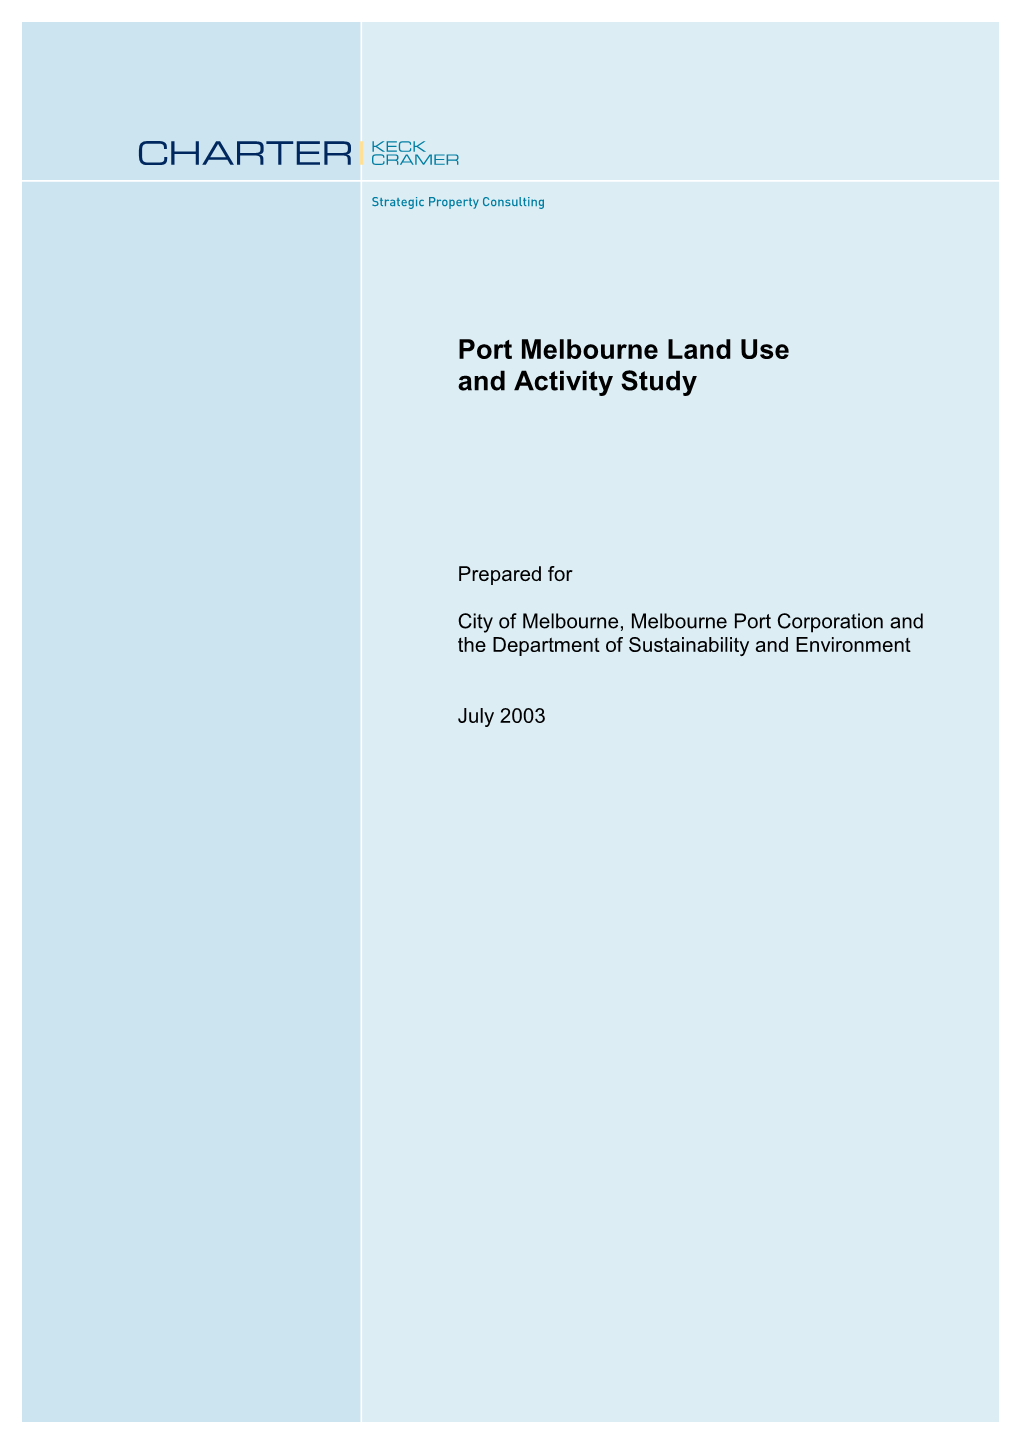 Port Melbourne Land Use and Activity Study